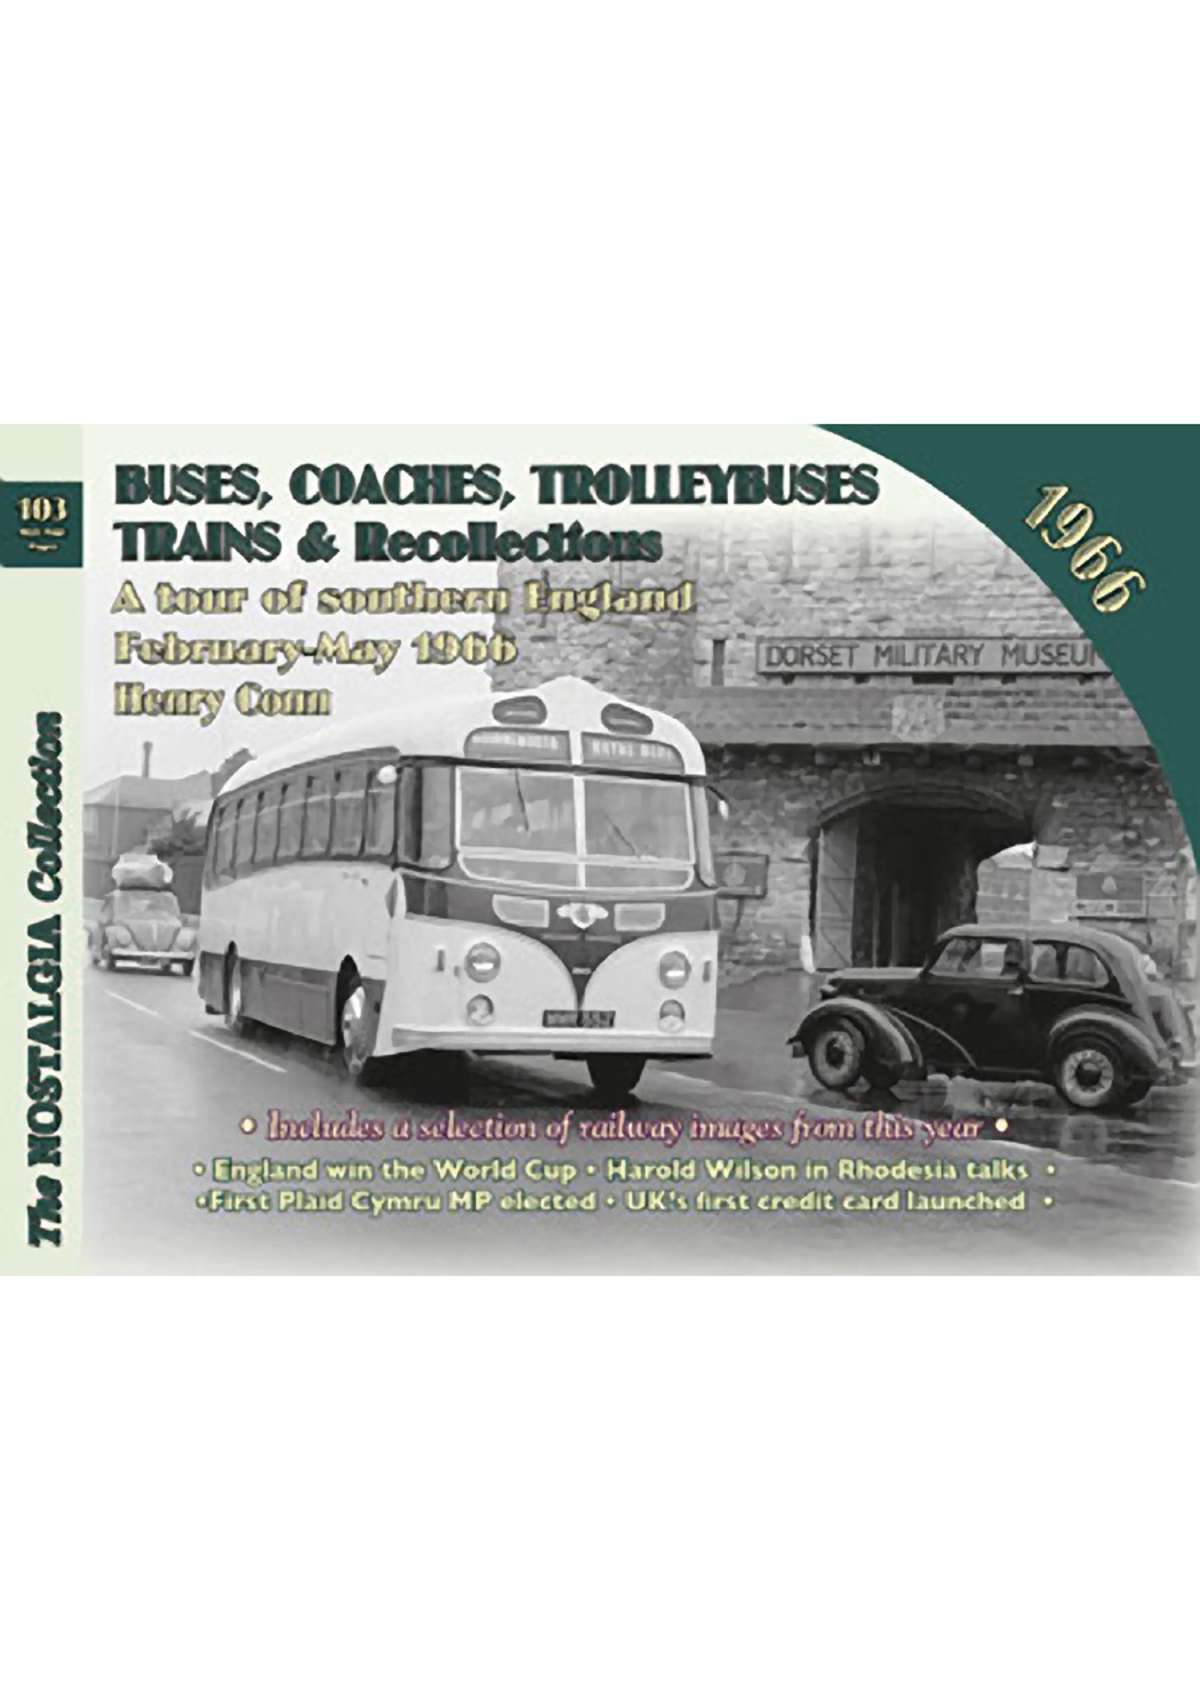 5423 - Vol 103 Buses, coaches, trolleybuses and Recollections 1966